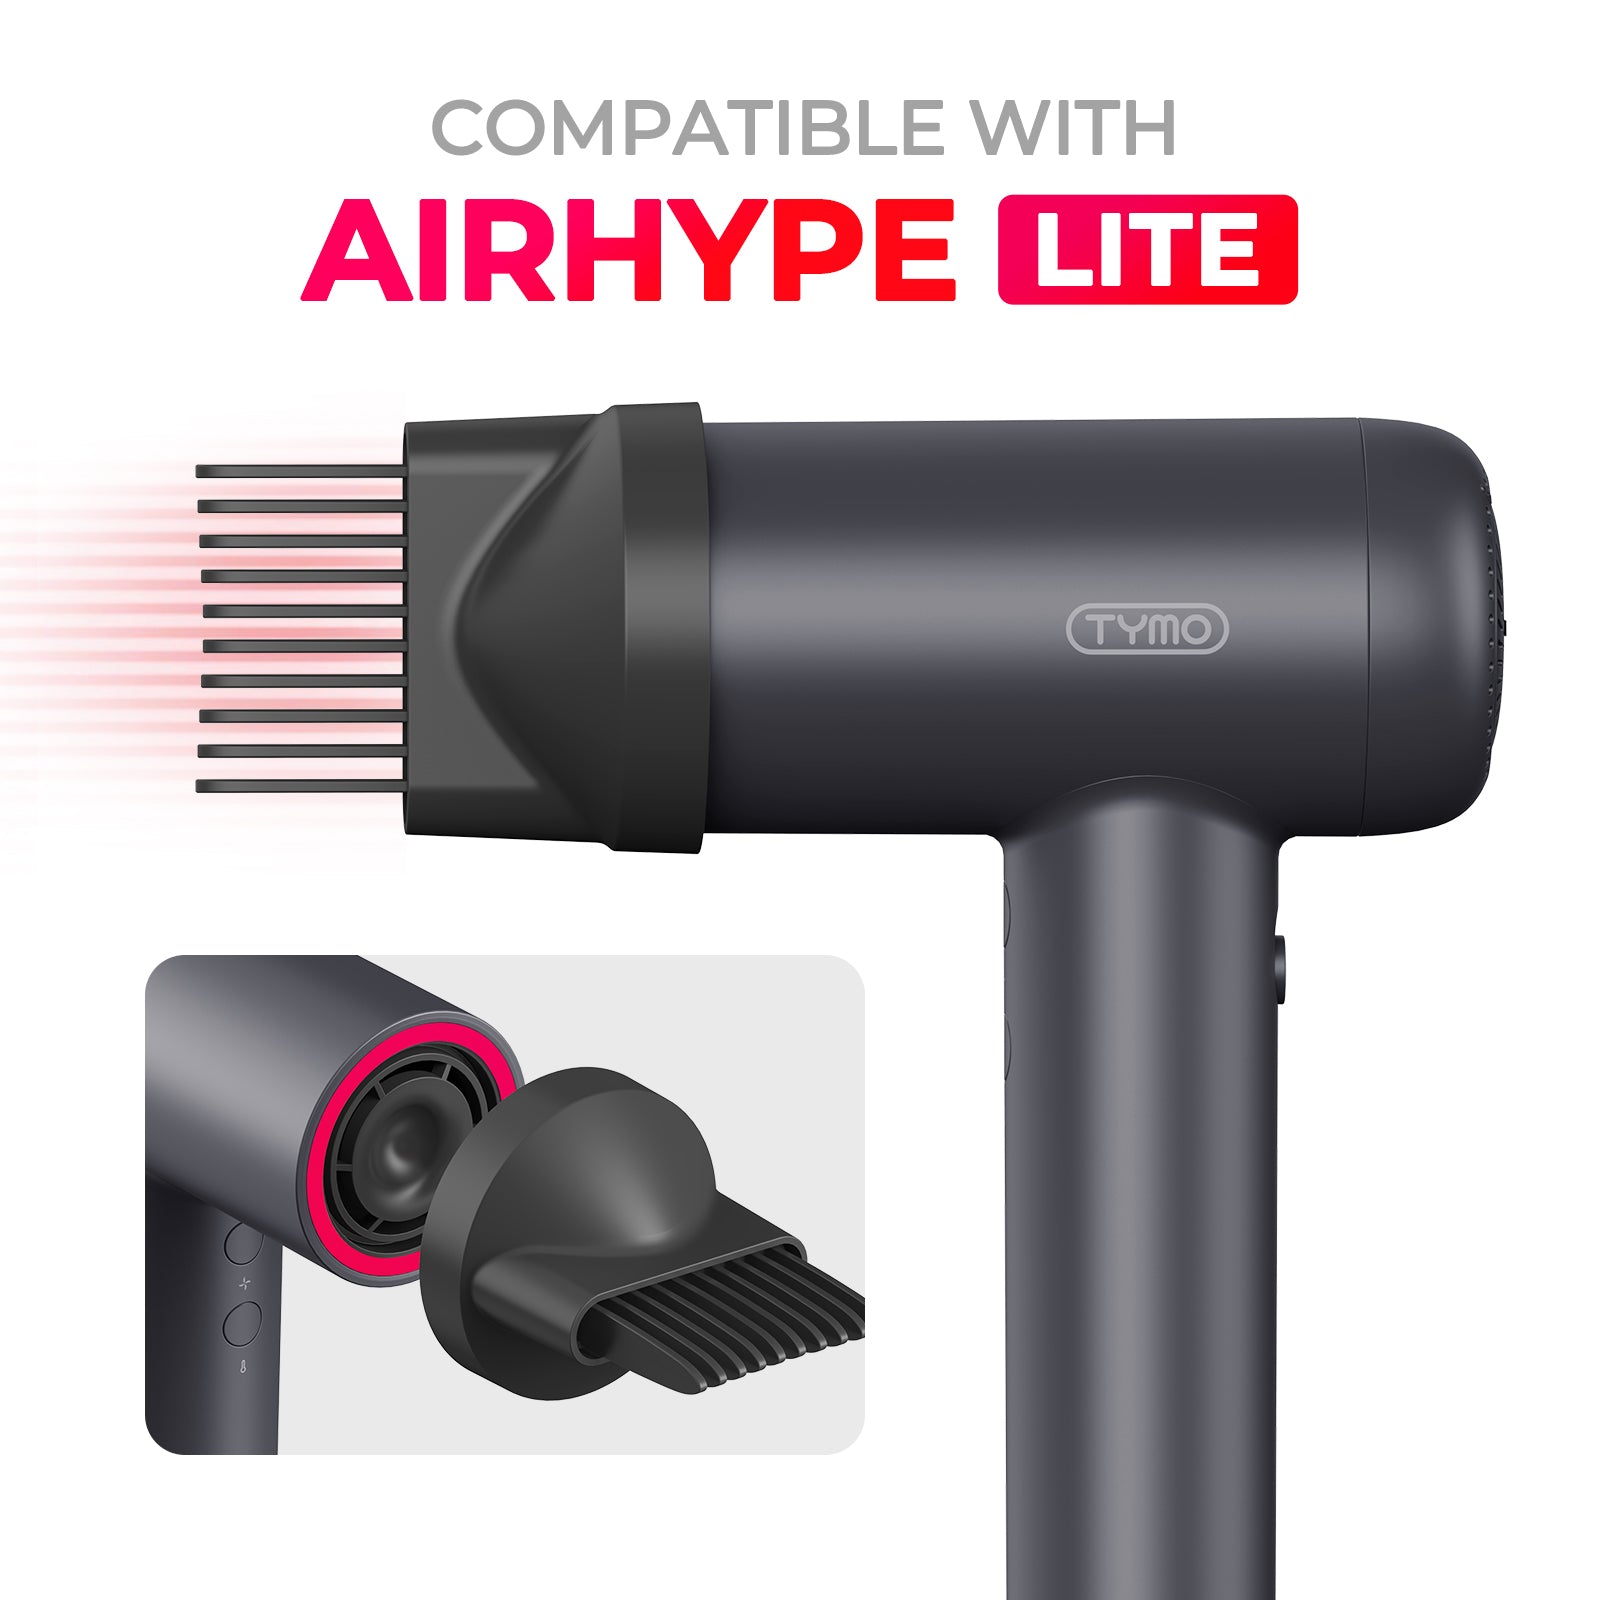 Comb Nozzle for TYMO AIRHYPE LITE Dryer 【SOLD OUT】